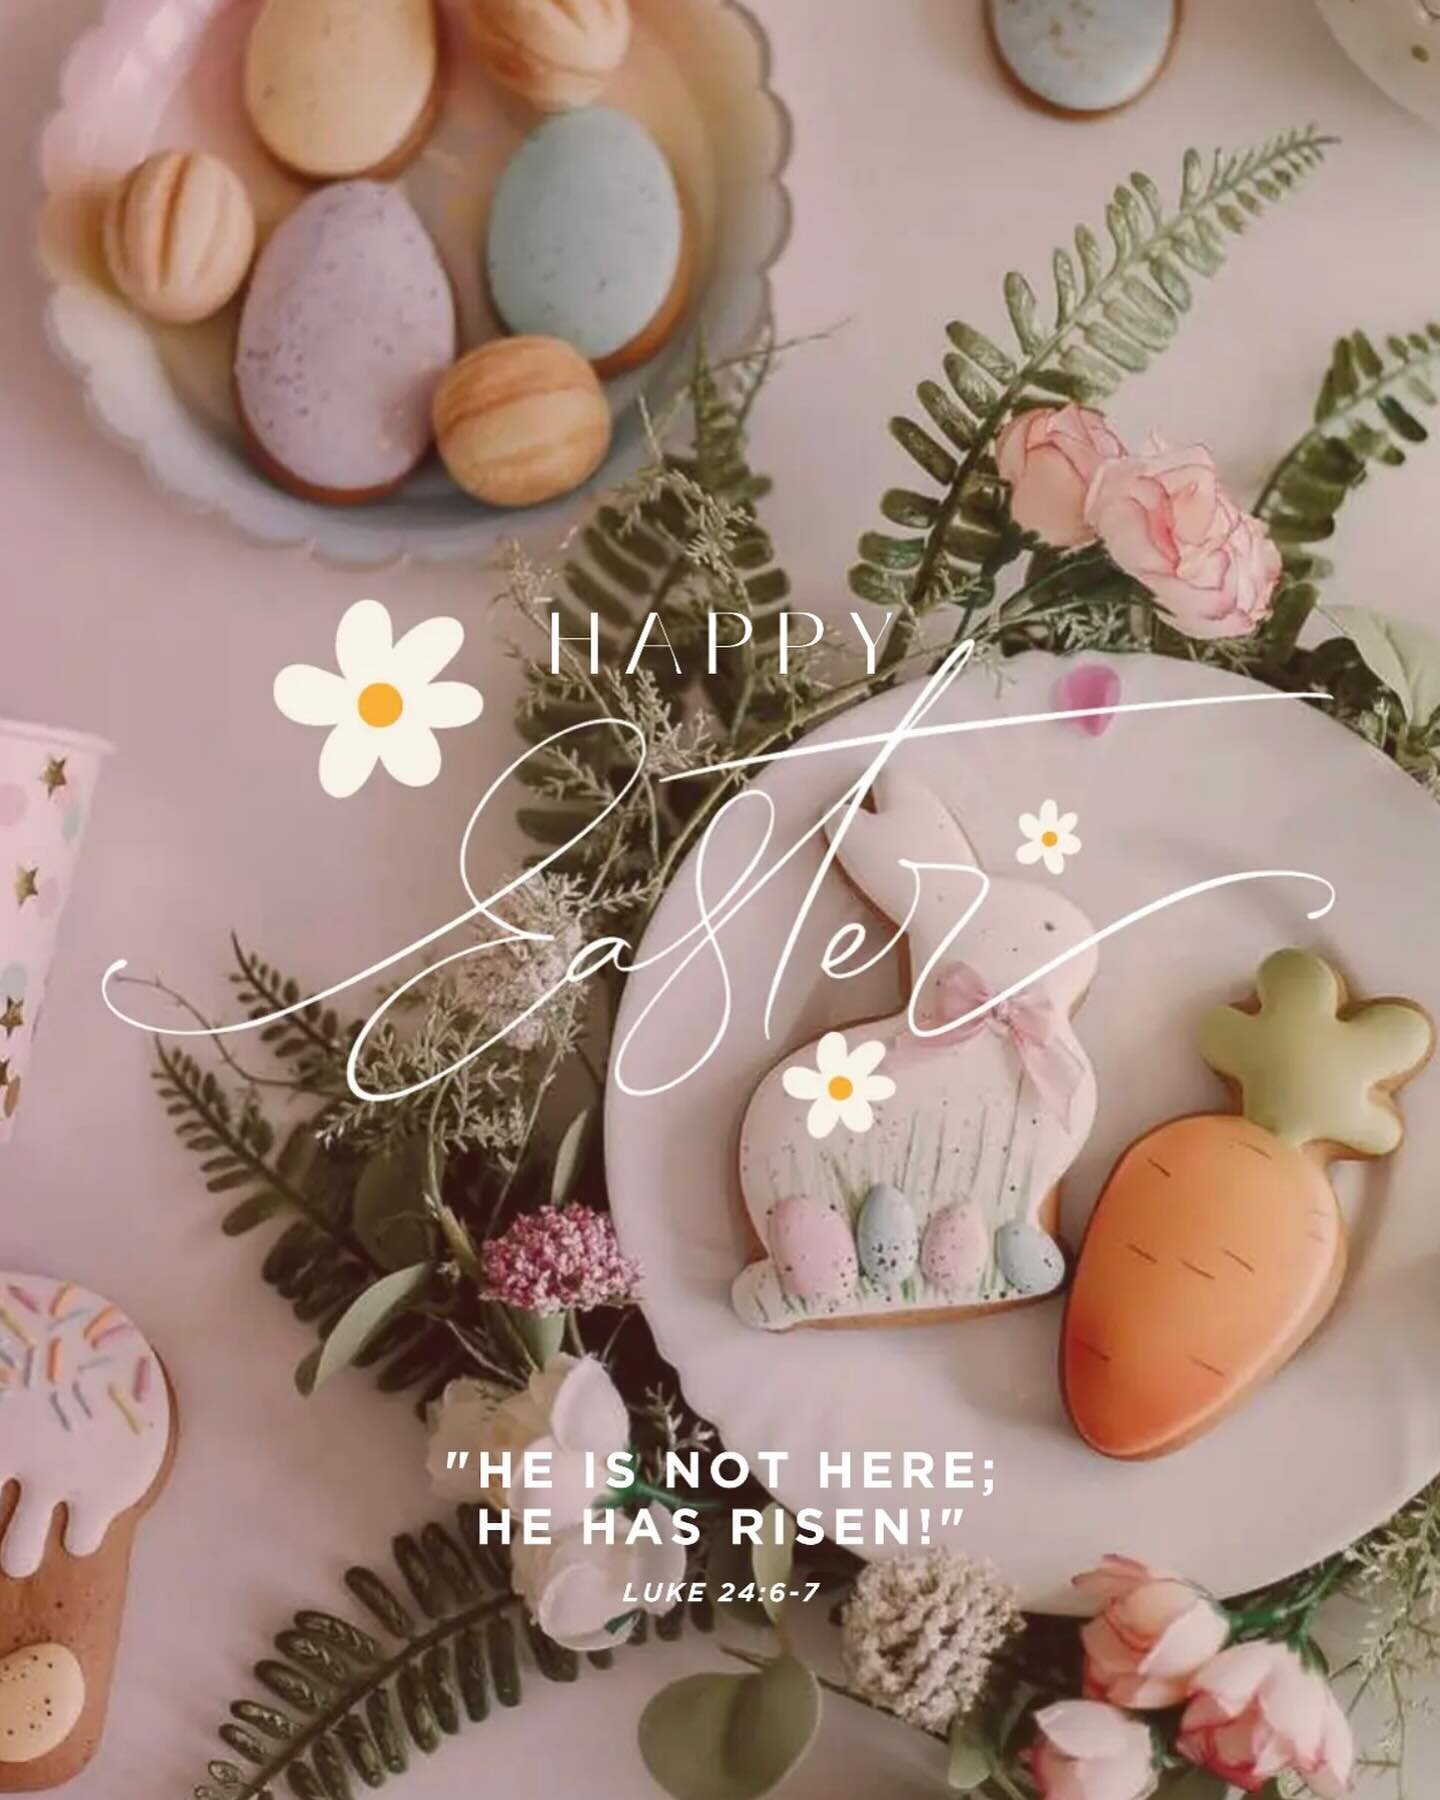 May your Easter be as sweet as chocolate eggs and as joyful as a blossoming spring! Wishing you all a beautiful day filled with love, laughter, and delightful moments. Happy Easter from all of us at Belle! 🐰🌷🐣
&bull;
&bull;
&bull;
✨ Email bellemag